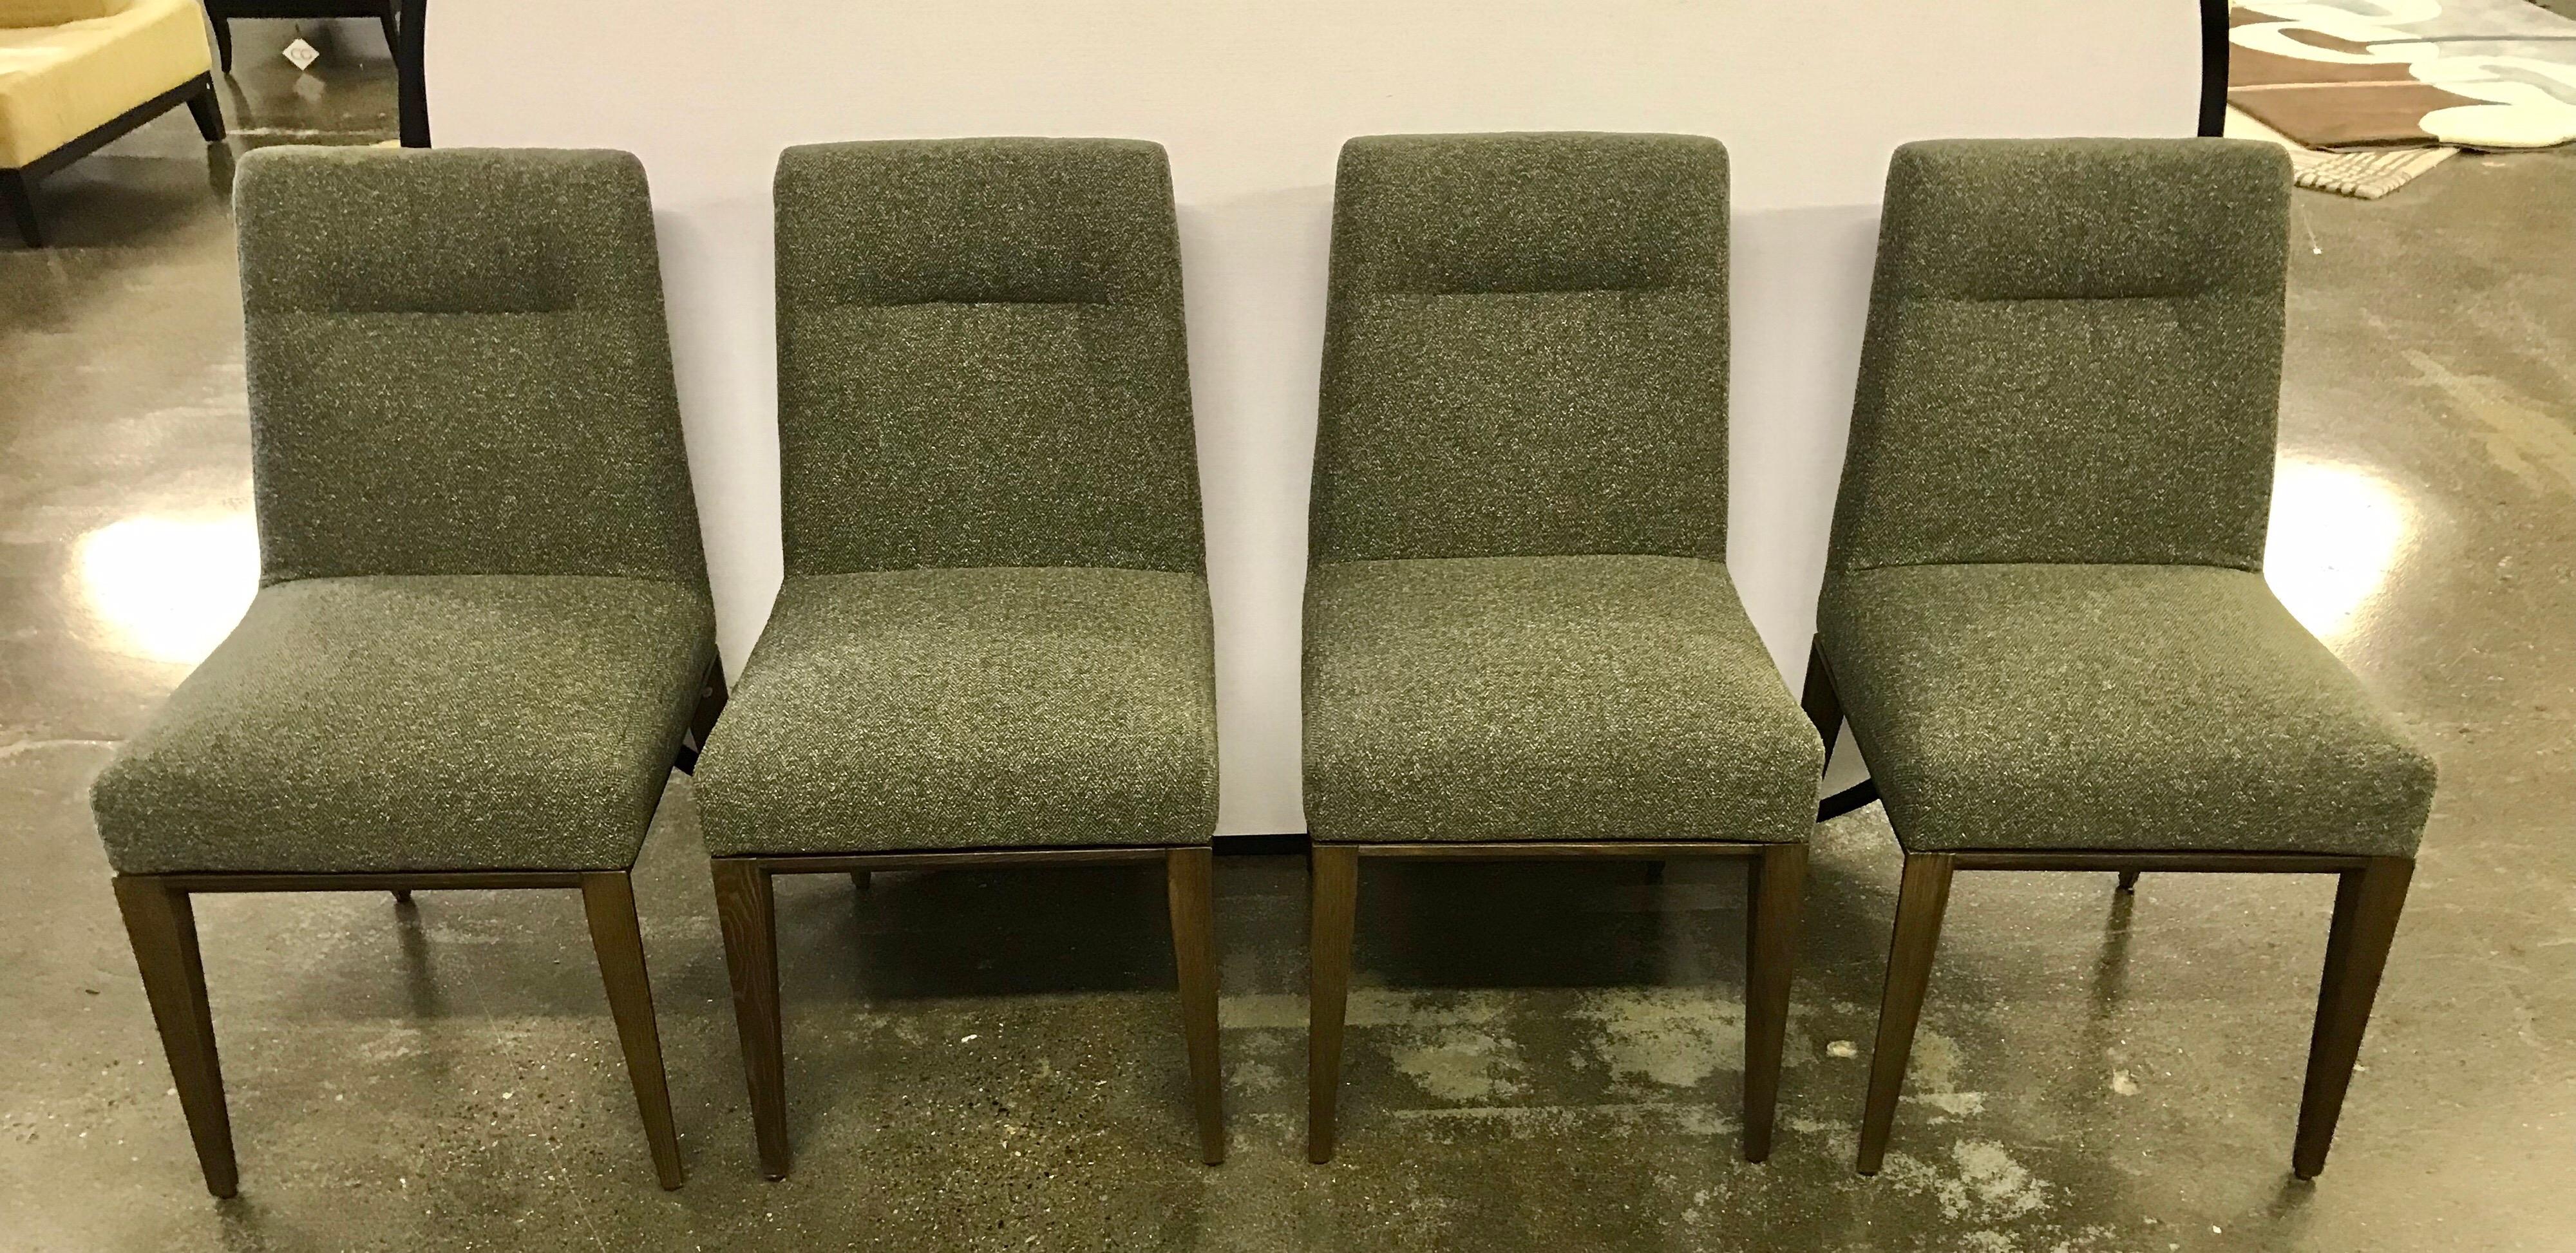 Elegant, contemporary matching dining chairs from Calligaris, made in Italy. They are in mint condition.
Fabric is a tweed weave and very luxurious.